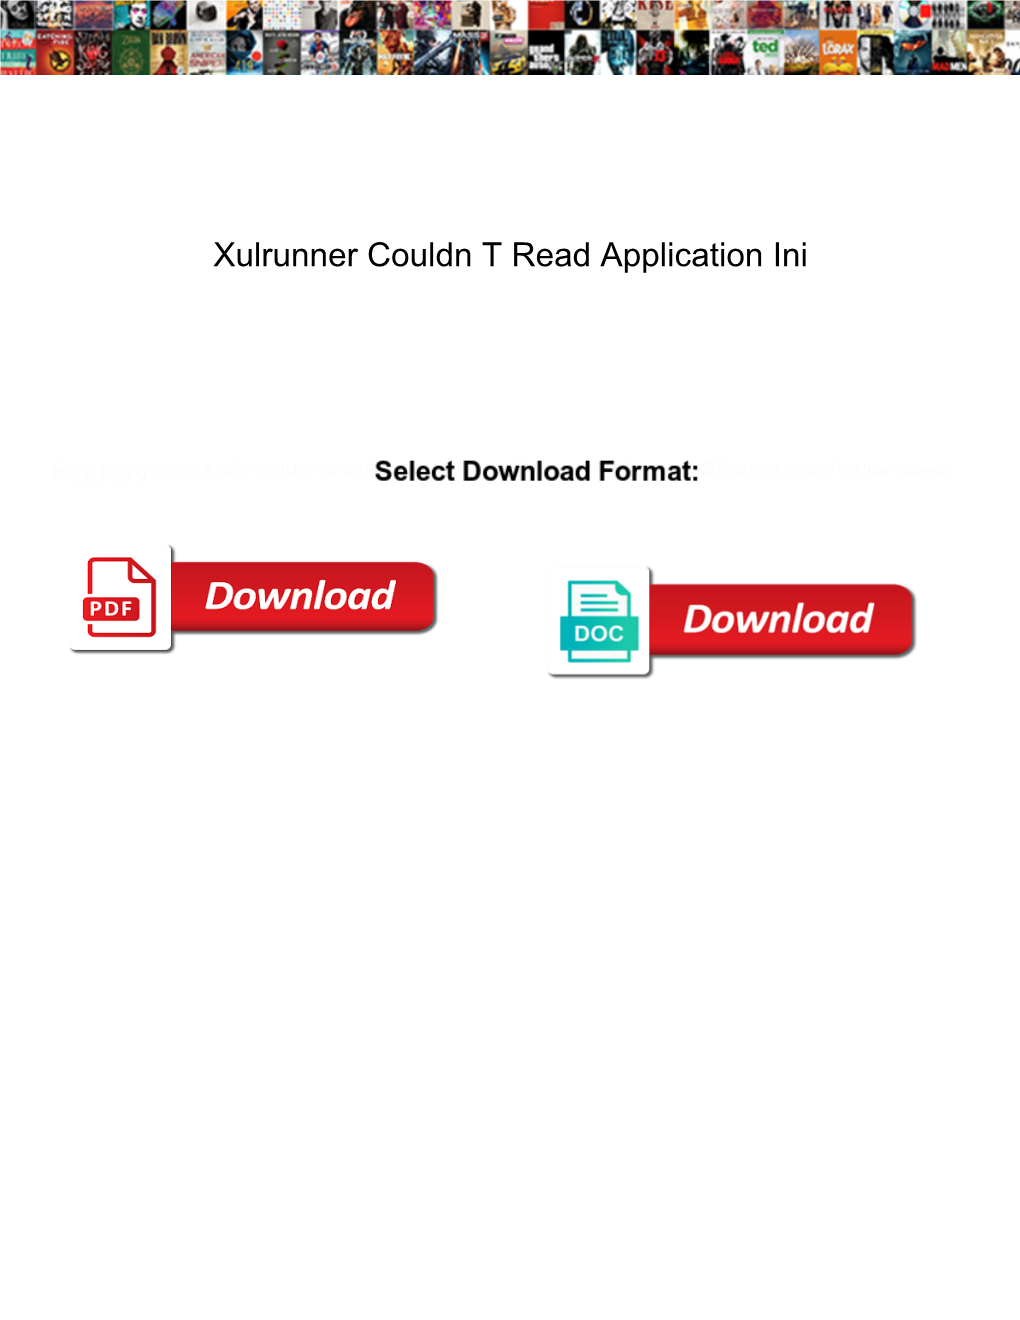 Xulrunner Couldn T Read Application Ini